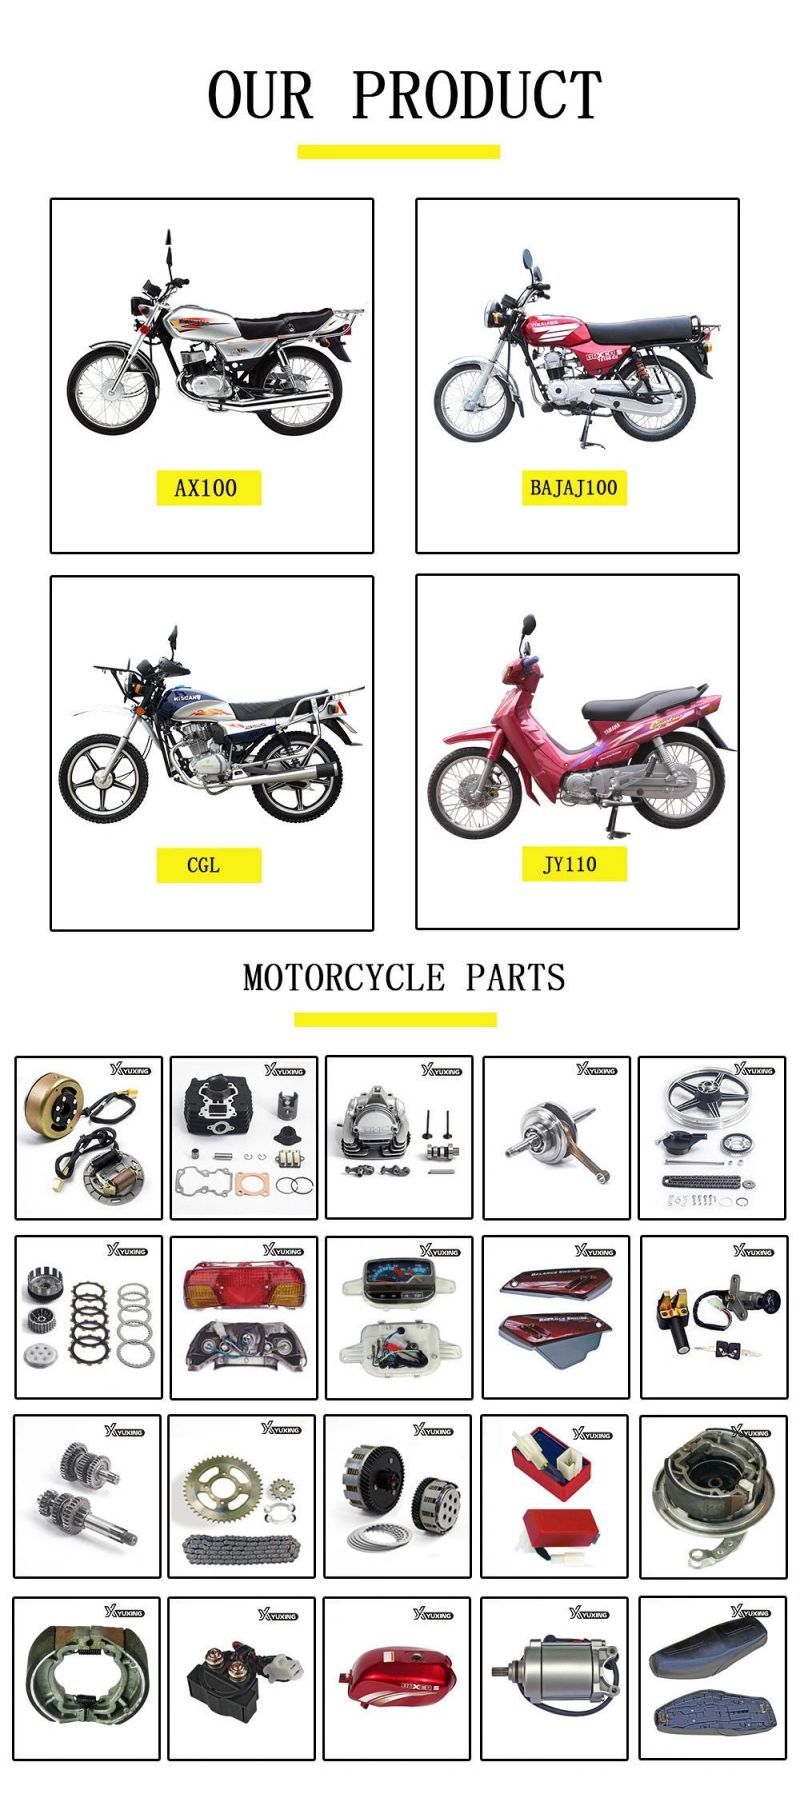 Yuxing Motorcycle Spare Parts Maintenance-Free Mf12V9-1A 12V9ah Motorcycle Battery for Motorbike